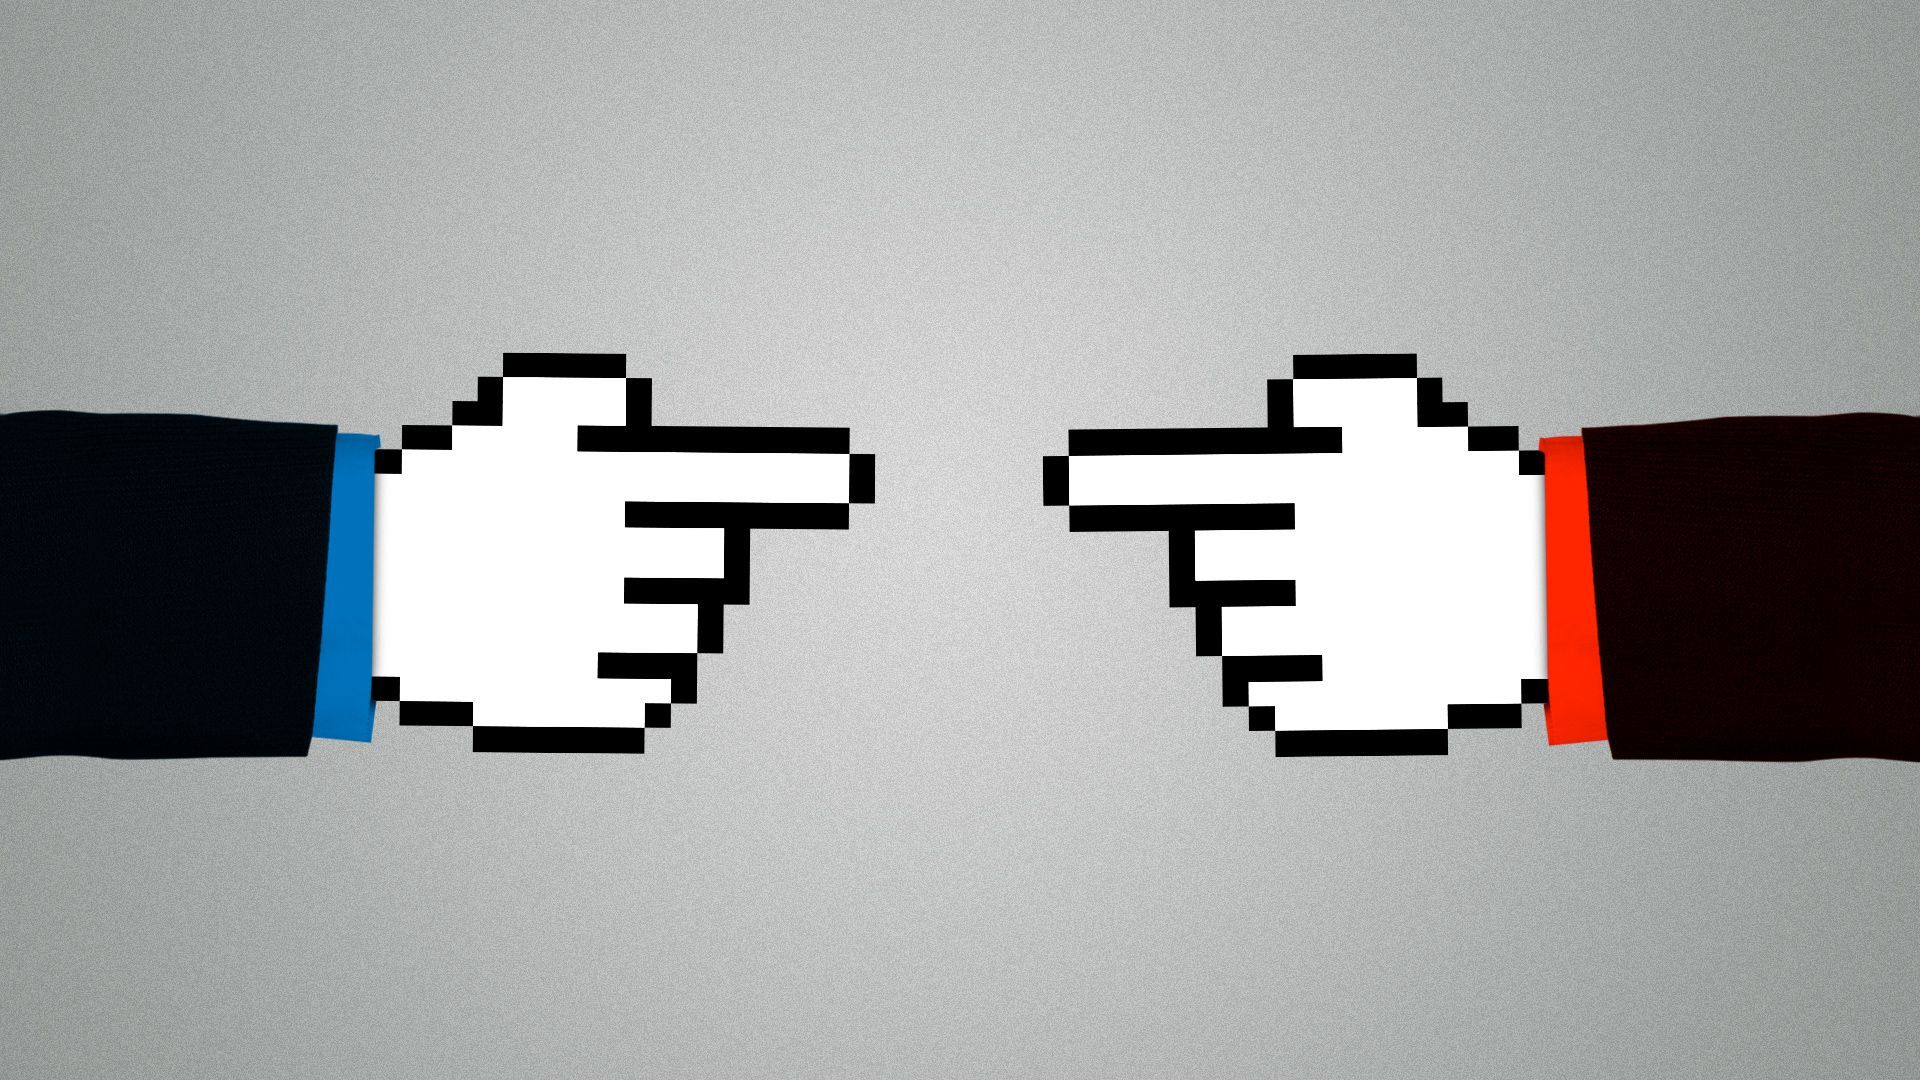 Illustration of two hands made out of cursors pointing at each other. The shirt worn by each hand designates their party.  